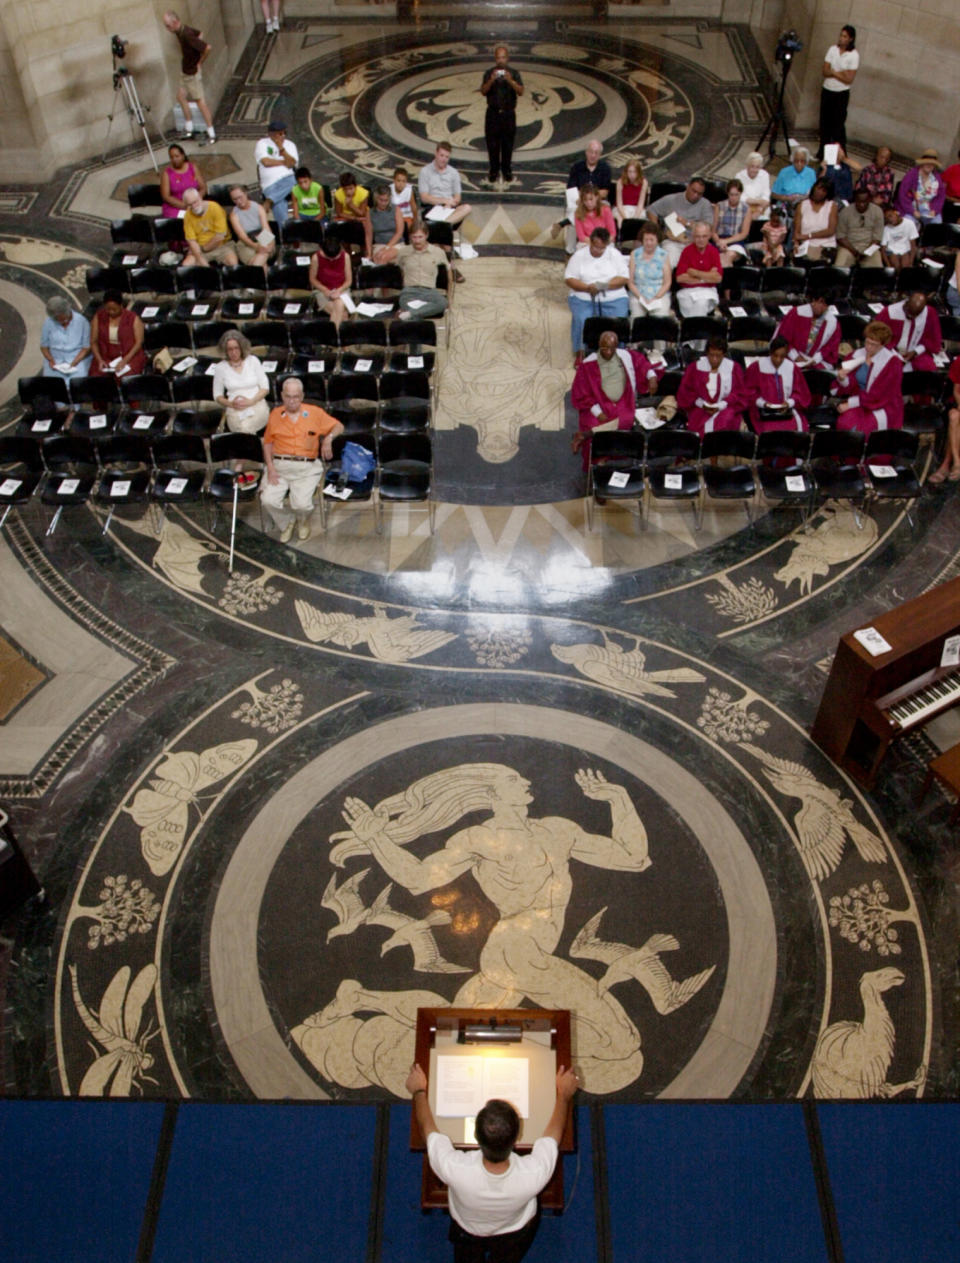 FILE - This Aug. 23, 2003 file photo shows Nebraska Gov. Mike Johanns, bottom, addresses a gathering in the rotunda of the State Capitol in Lincoln featuring the floor decorated with the design of Art Deco muralist Hildreth Meiere. While Meiere's name has been largely forgotten her works abound throughout the country. “The Art Deco Murals of Hildreth Meiere,” by Catherine Coleman Brawer and Kathleen Murphy Skolnik with photographs by Meiere’s granddaughter, Hildreth Meiere Dunn, is set for release May 1. (AP Photo/Nati Harnik, File)